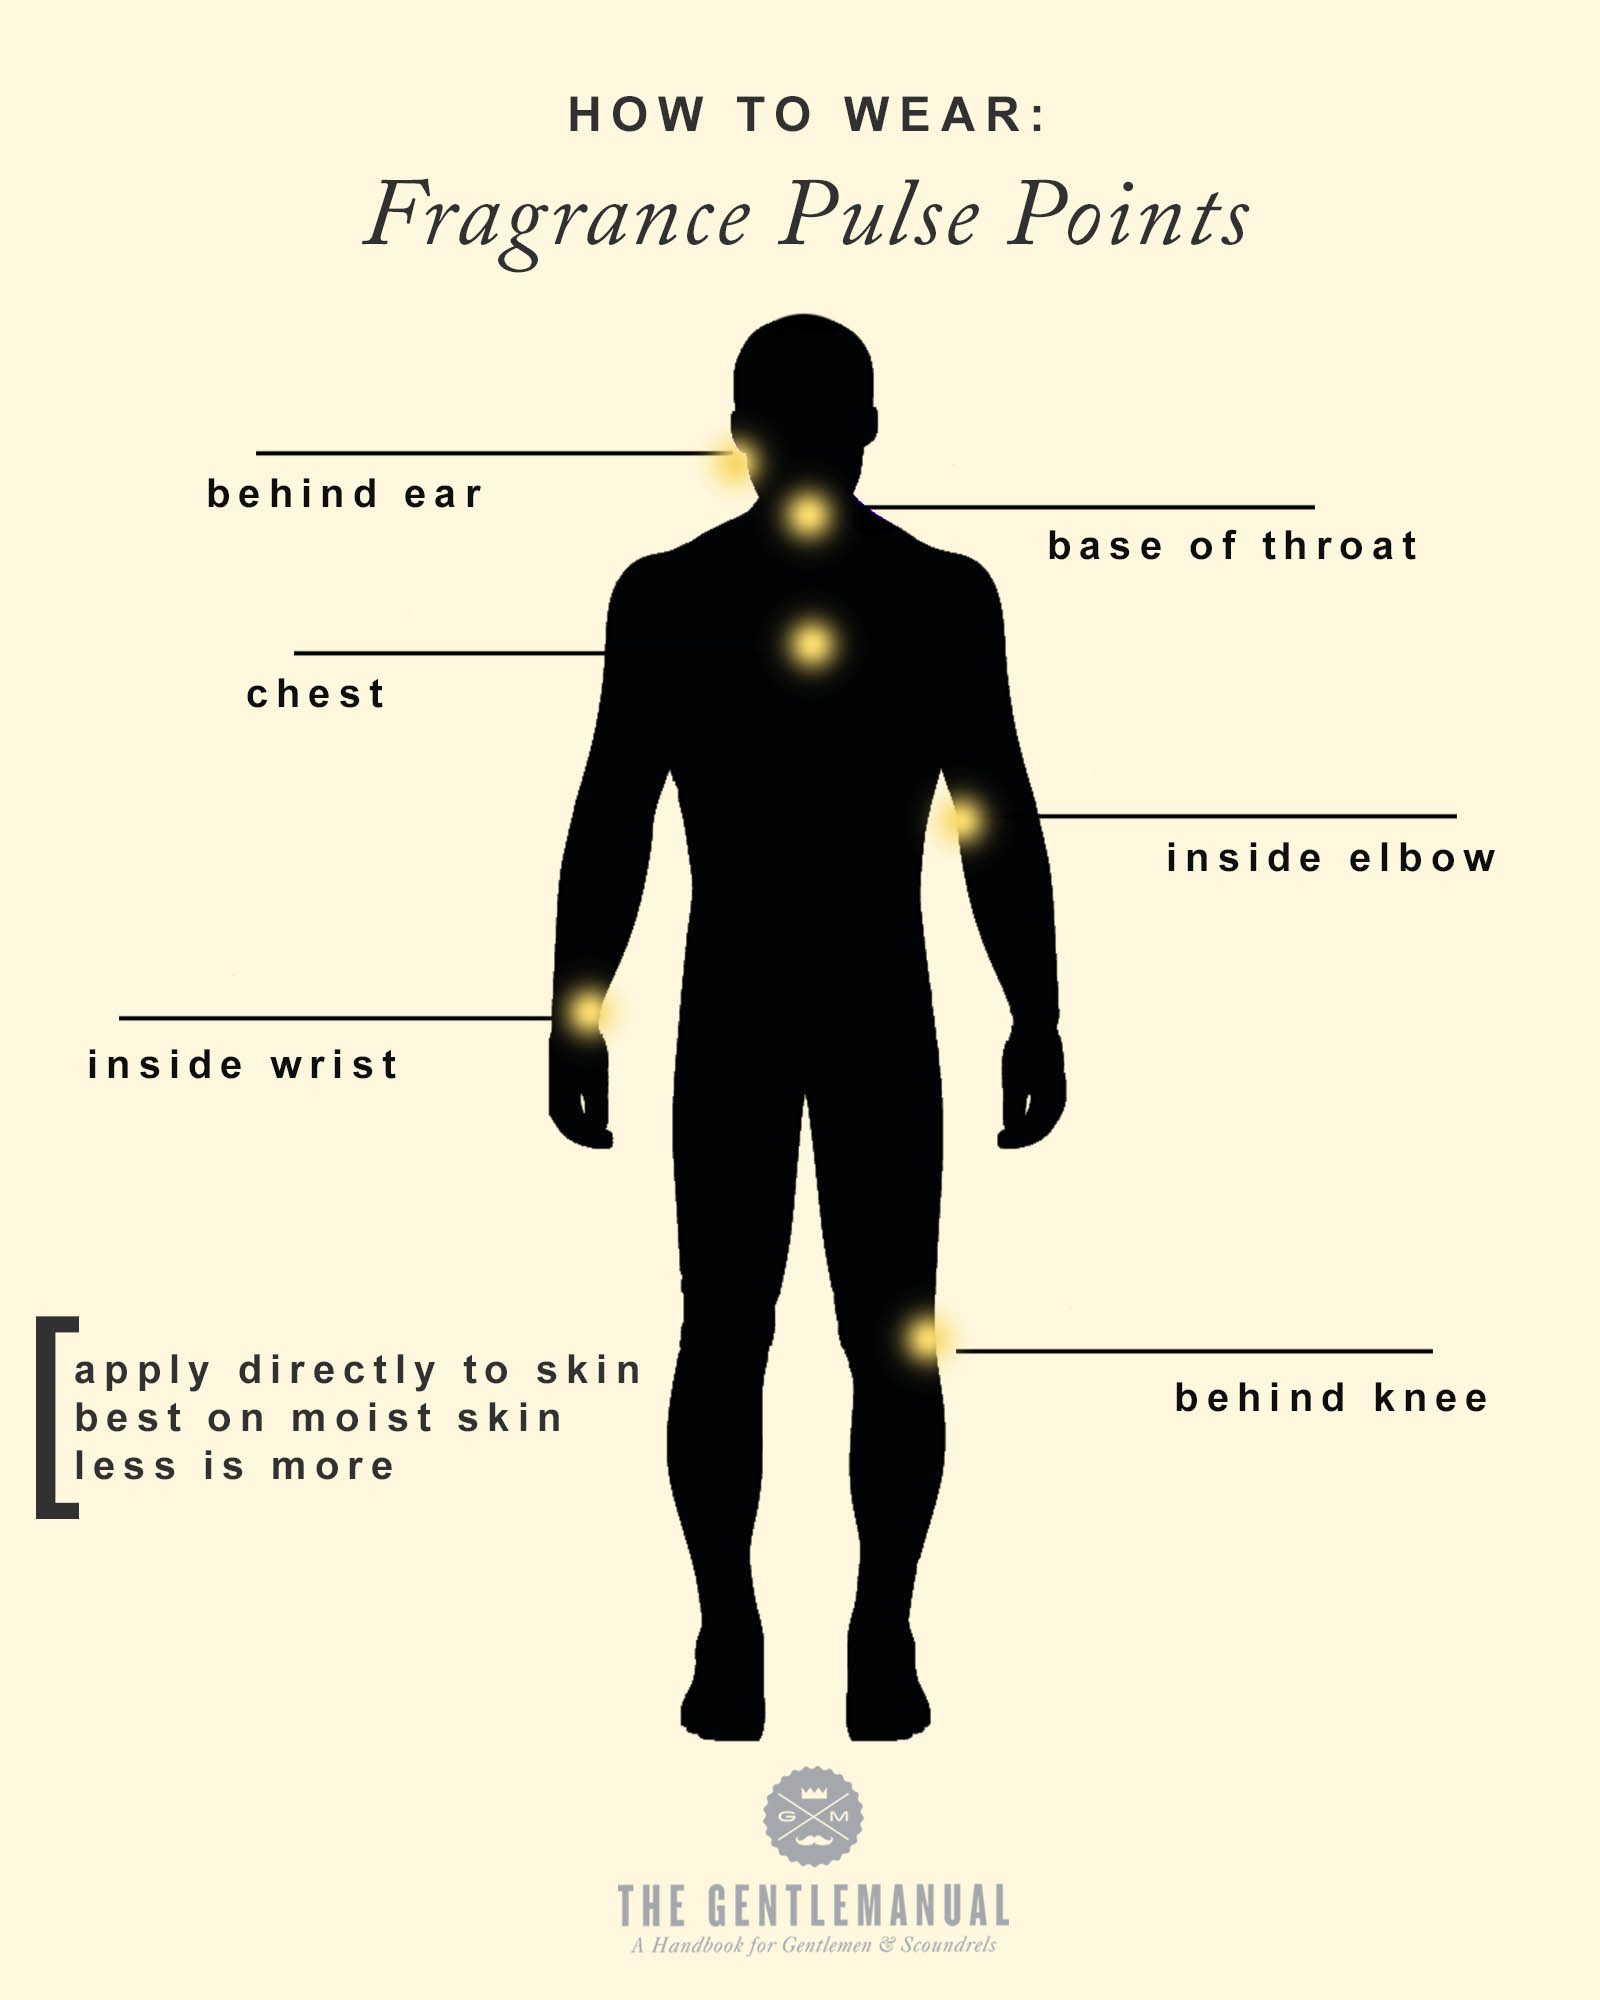 how to wear cologne mens fragrance guide pulse points